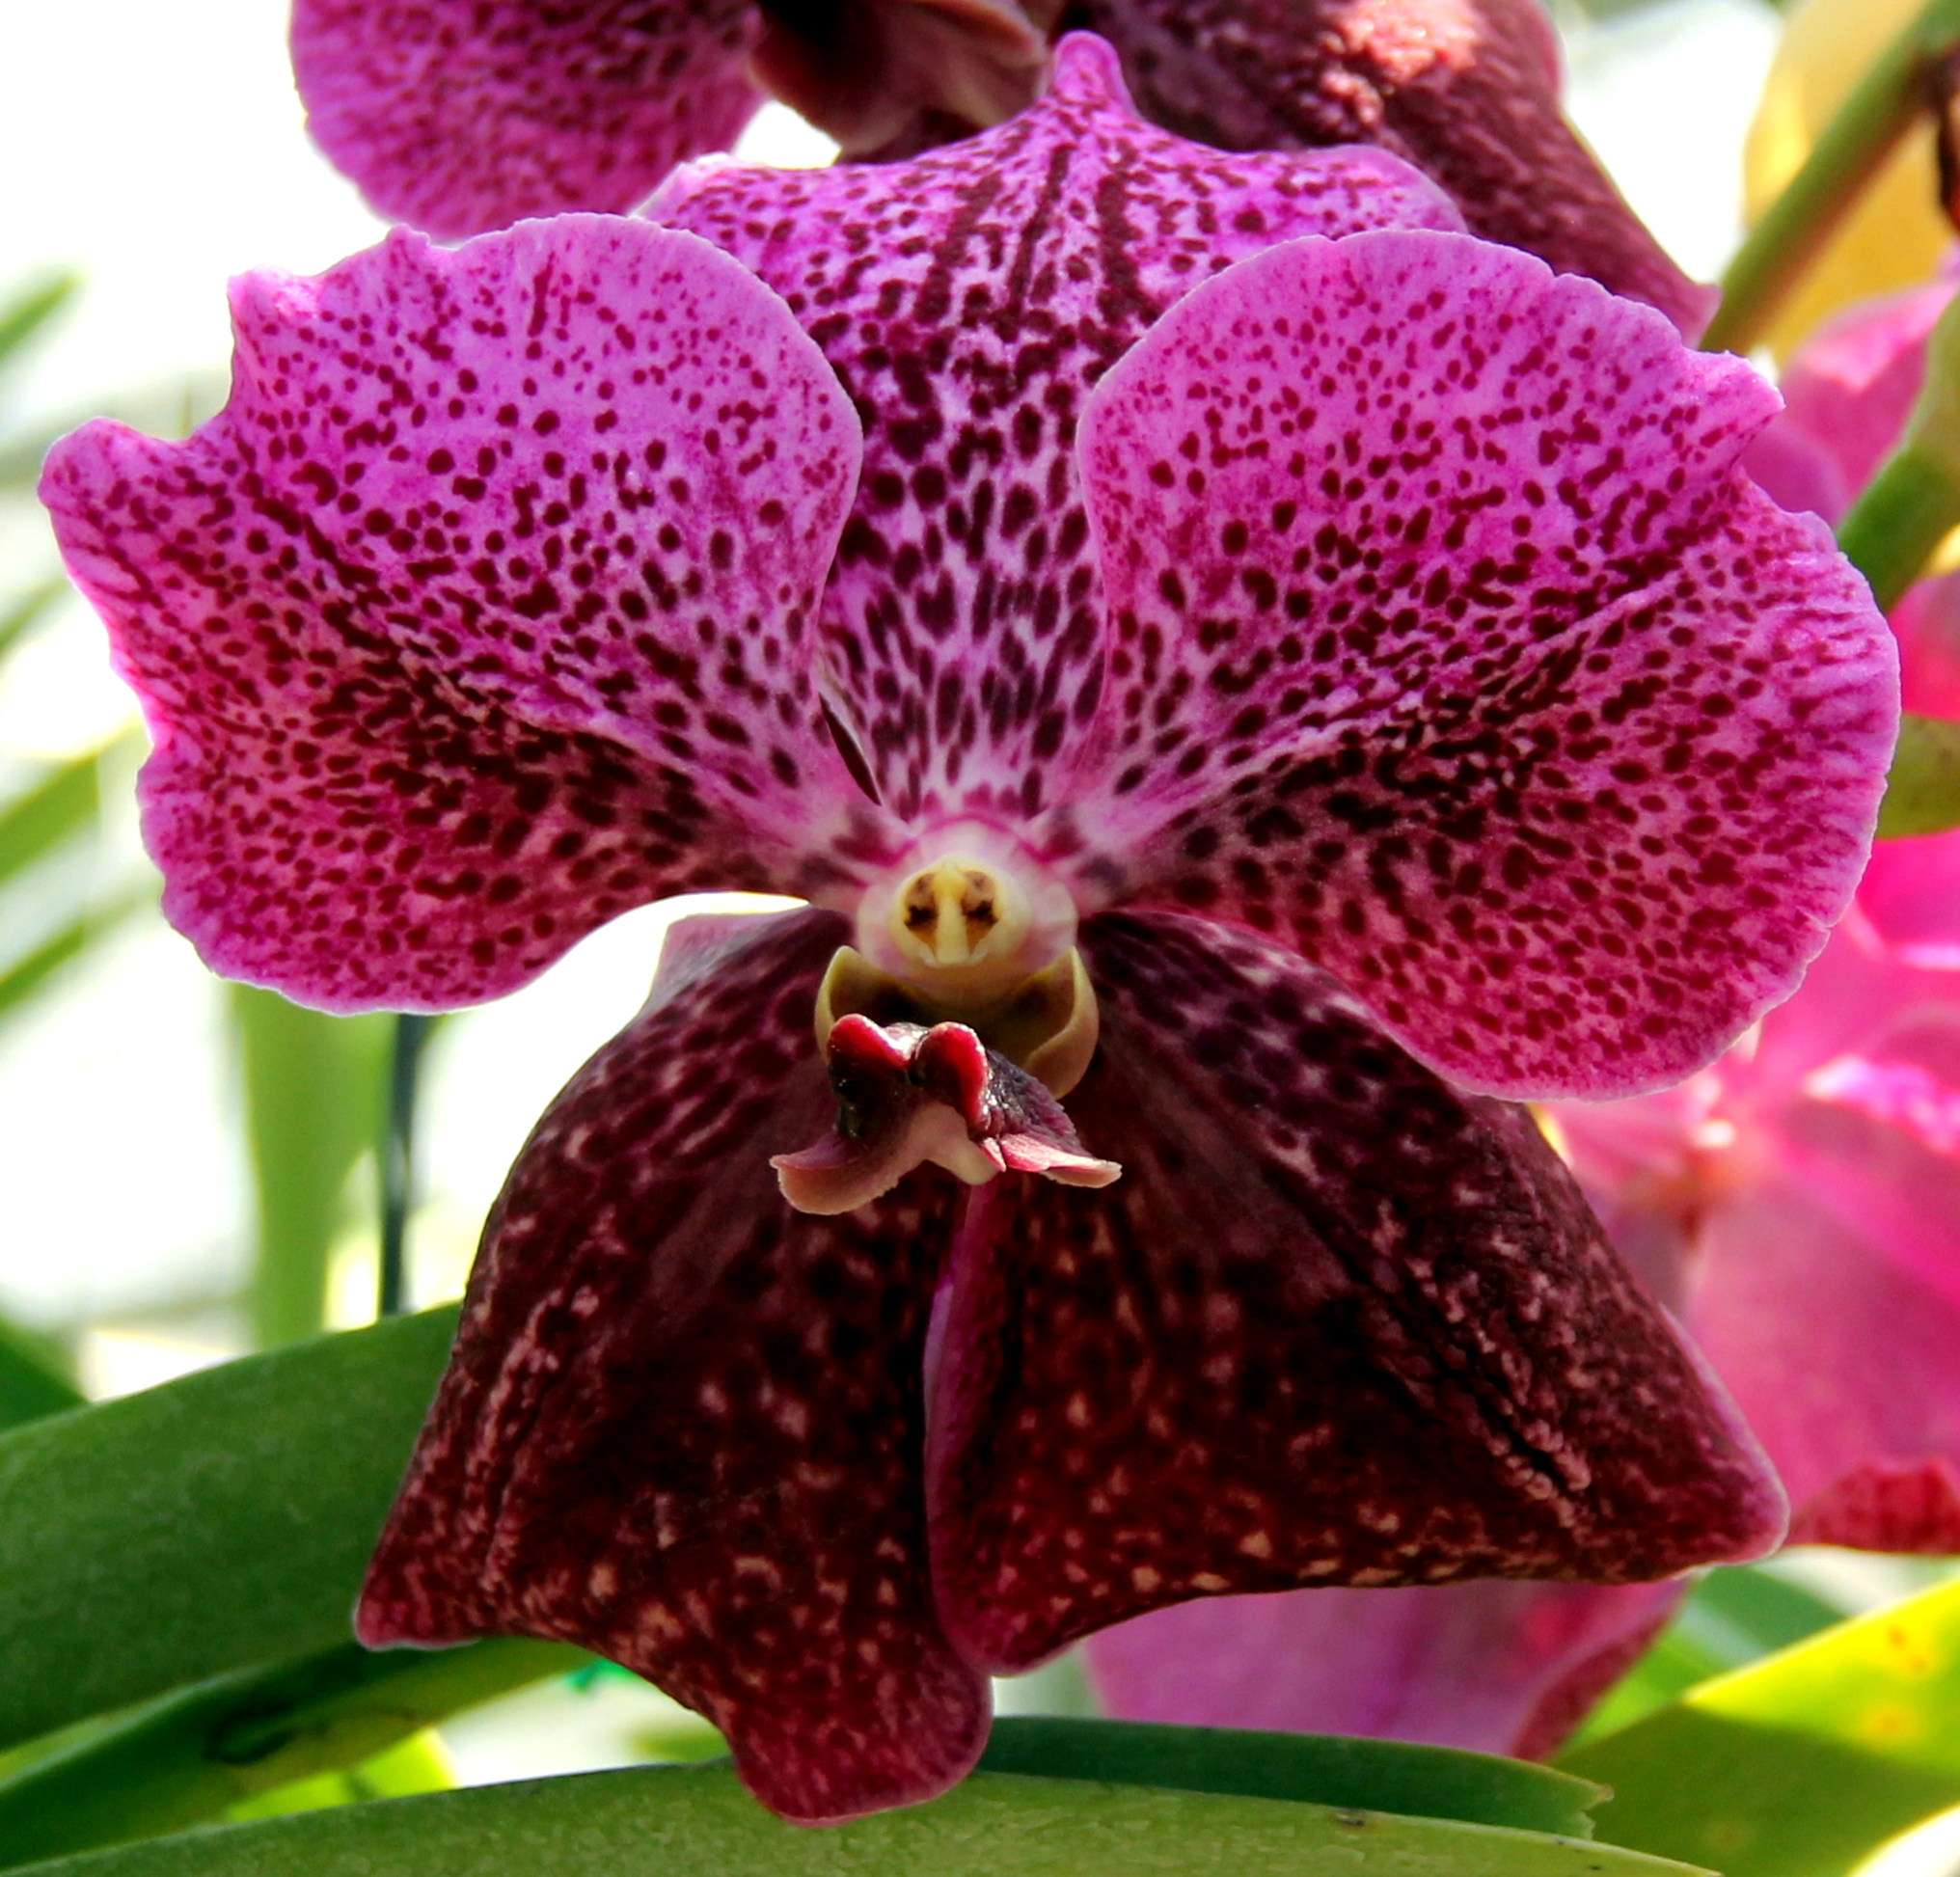 Simply orchid ......